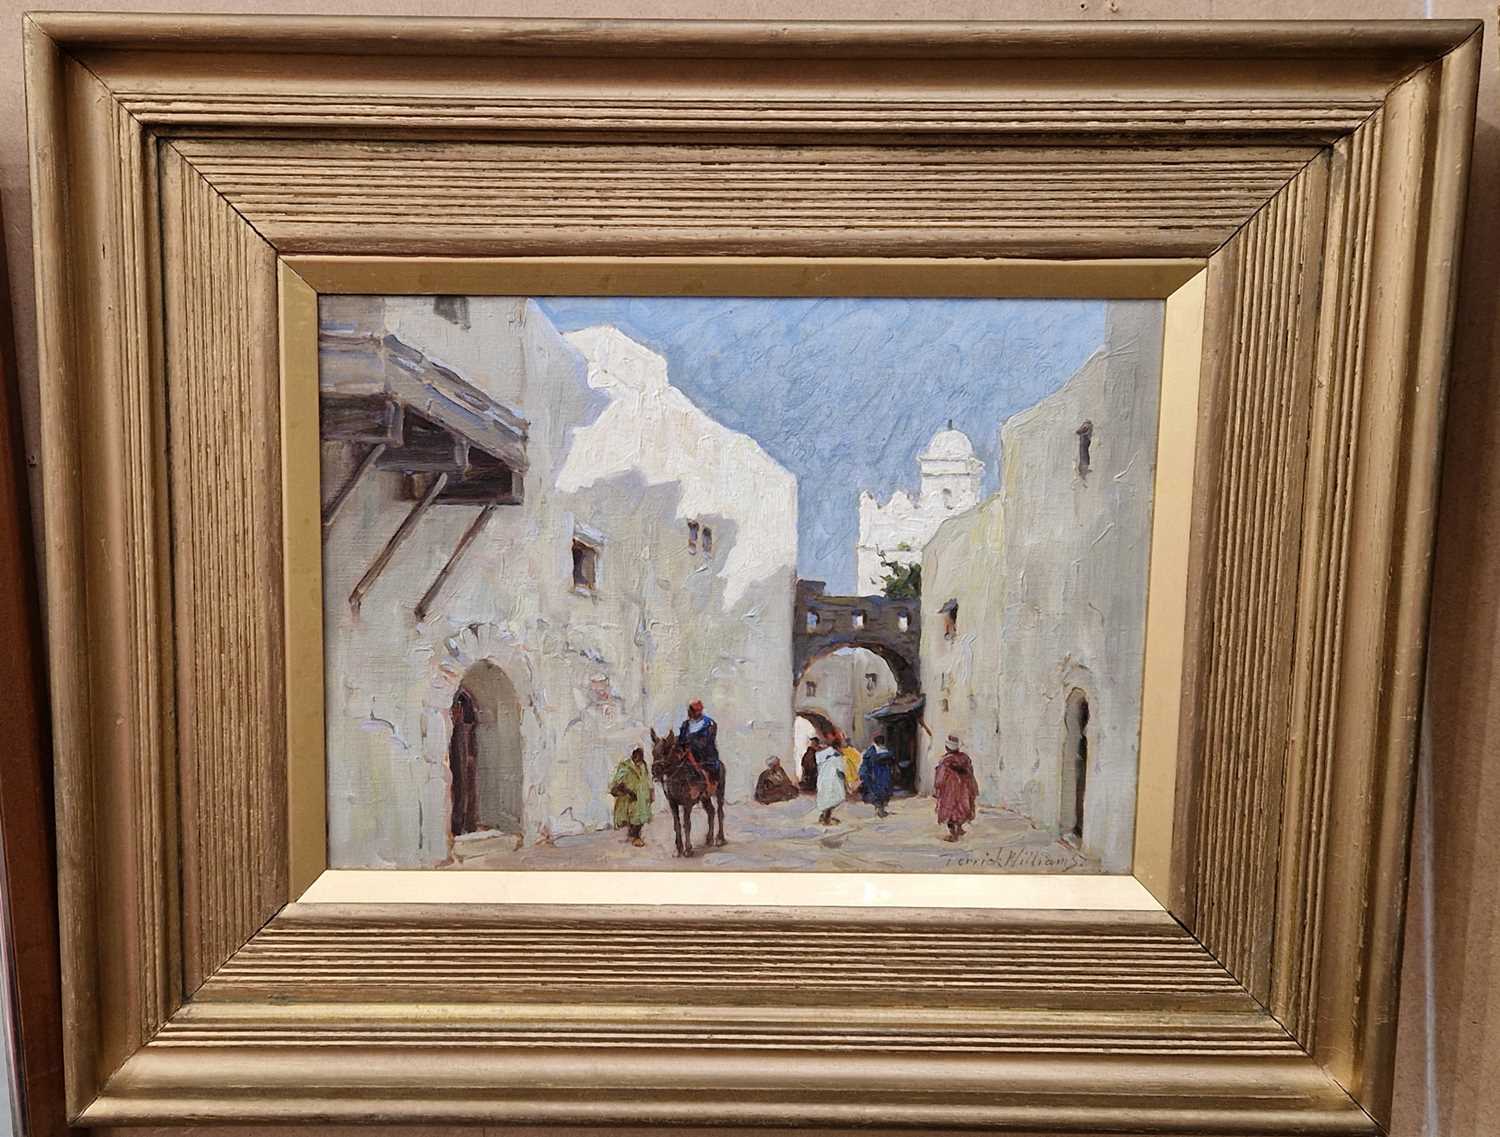 Terrick John Williams (1860-1936) A Street in Tetouan, Morocco oil on canvas, signed lower right,